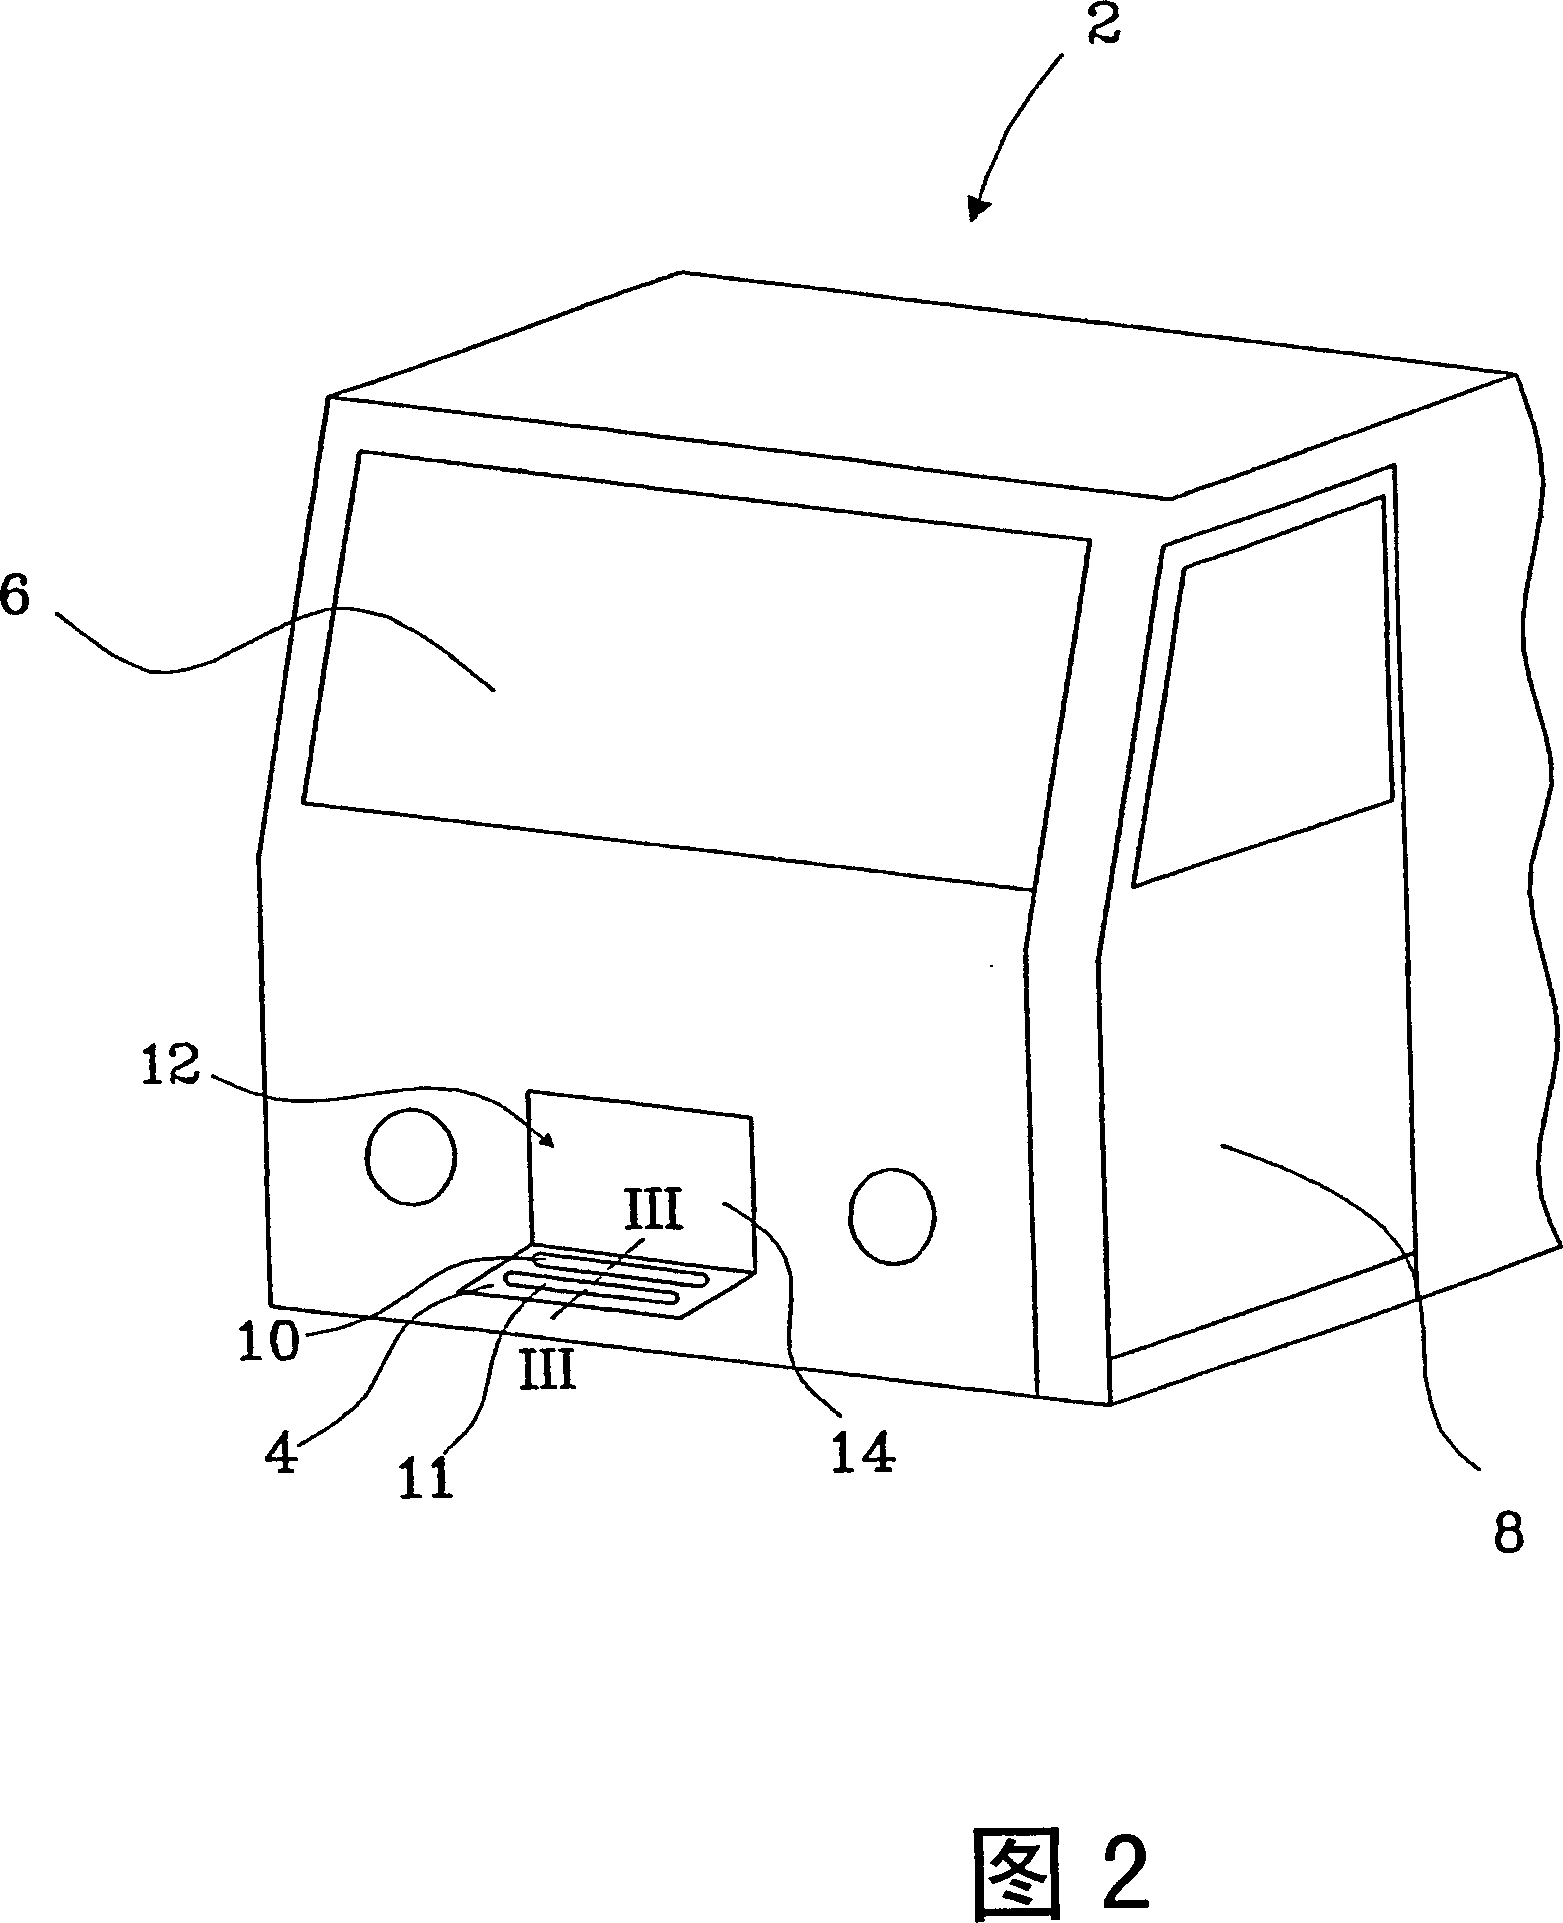 Fold-out exterior vehicle part